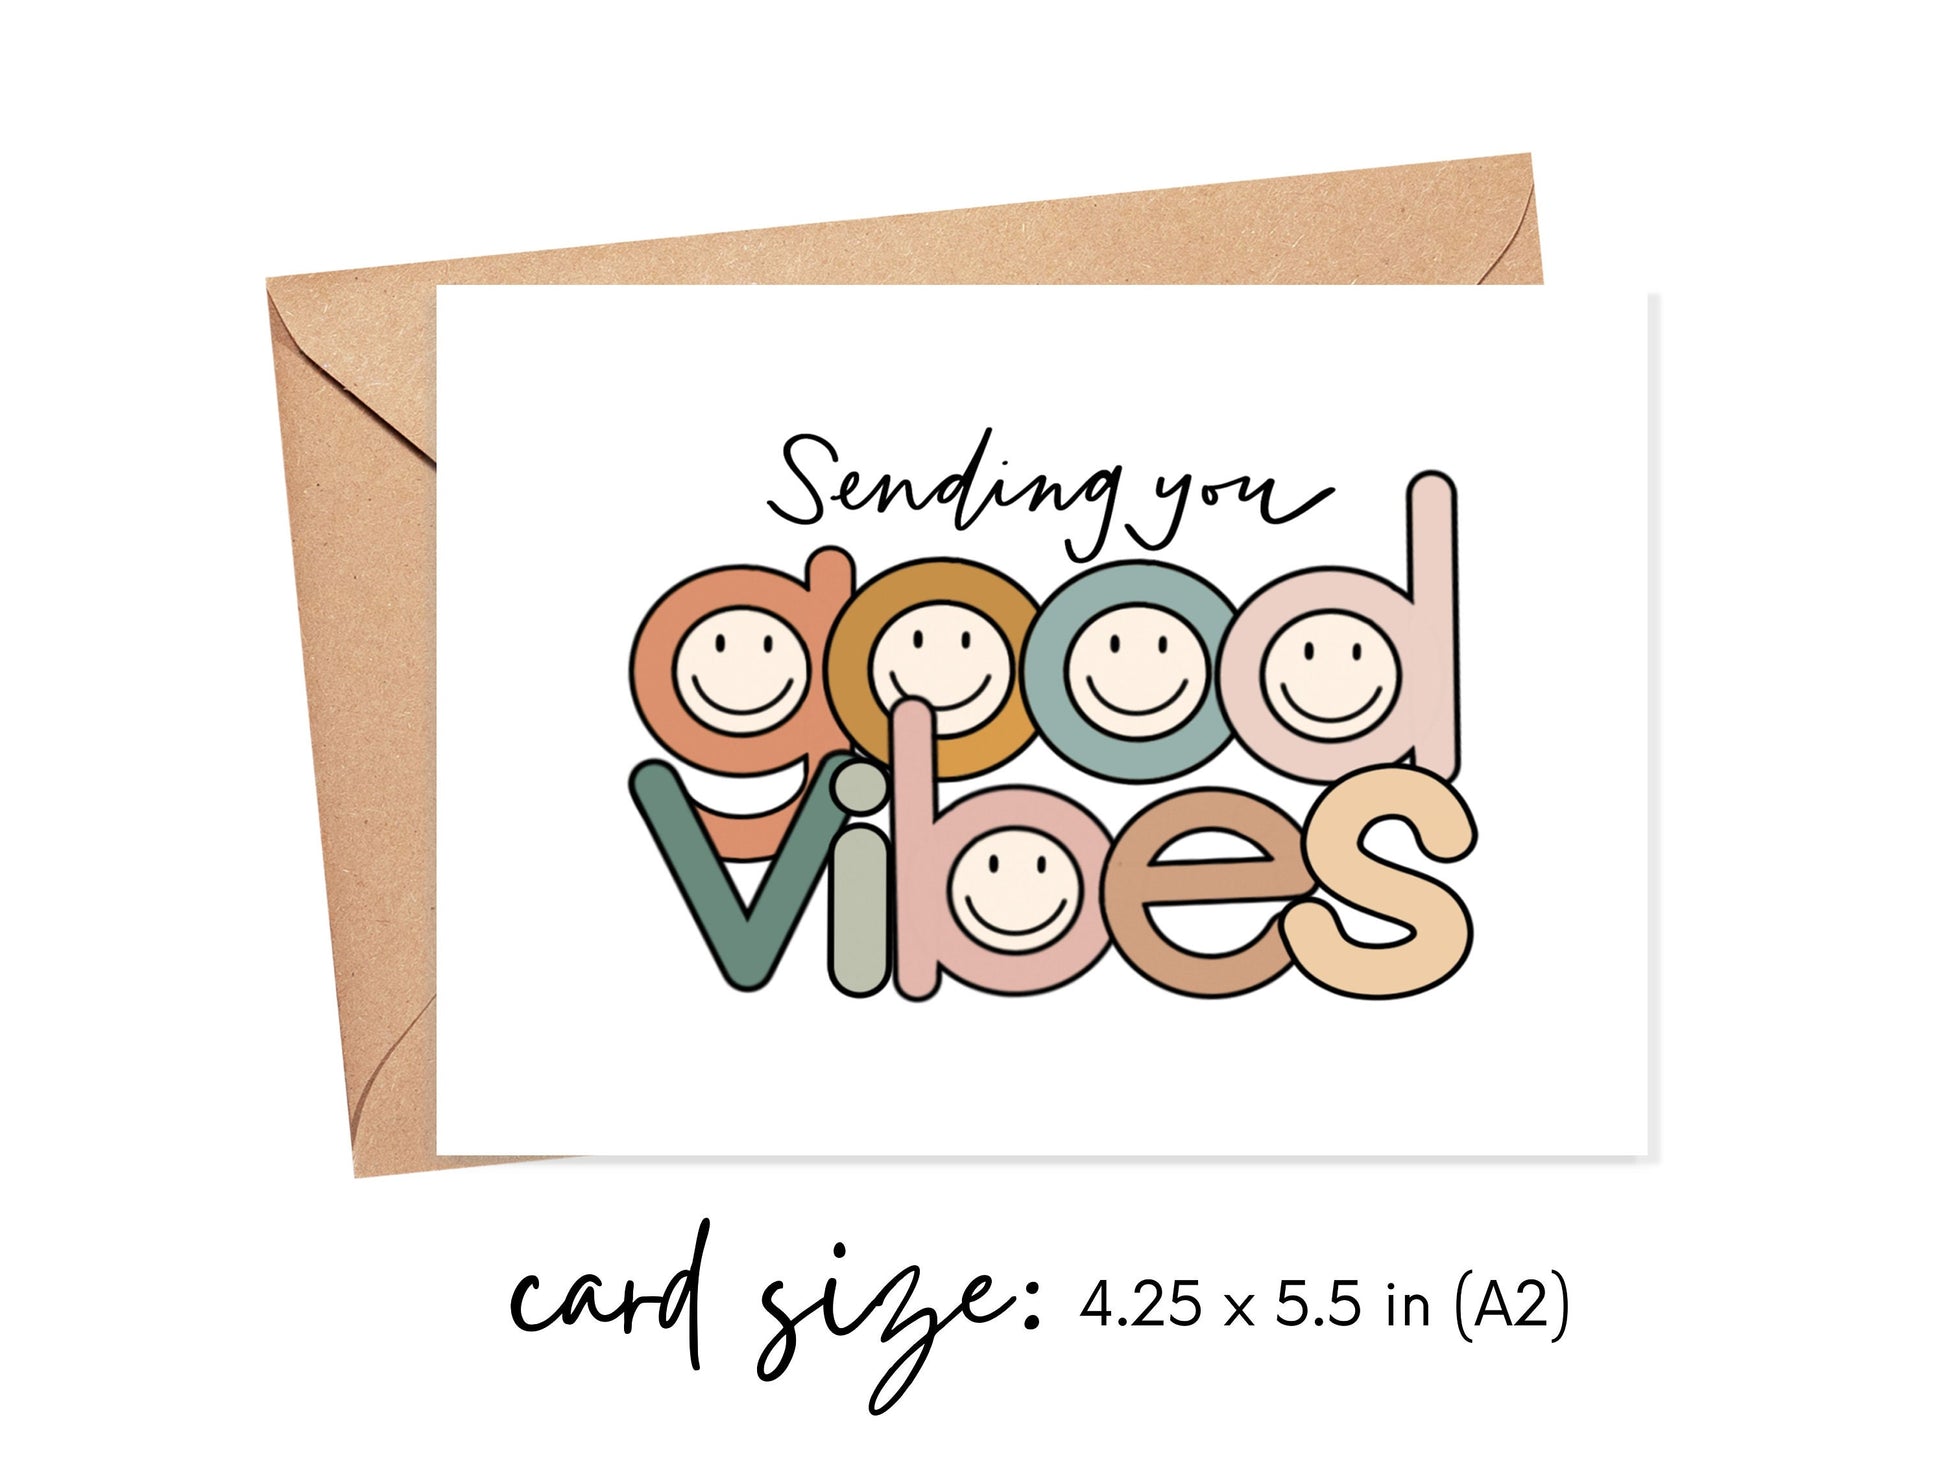 Sending You Good Vibes Card Simply Happy Cards